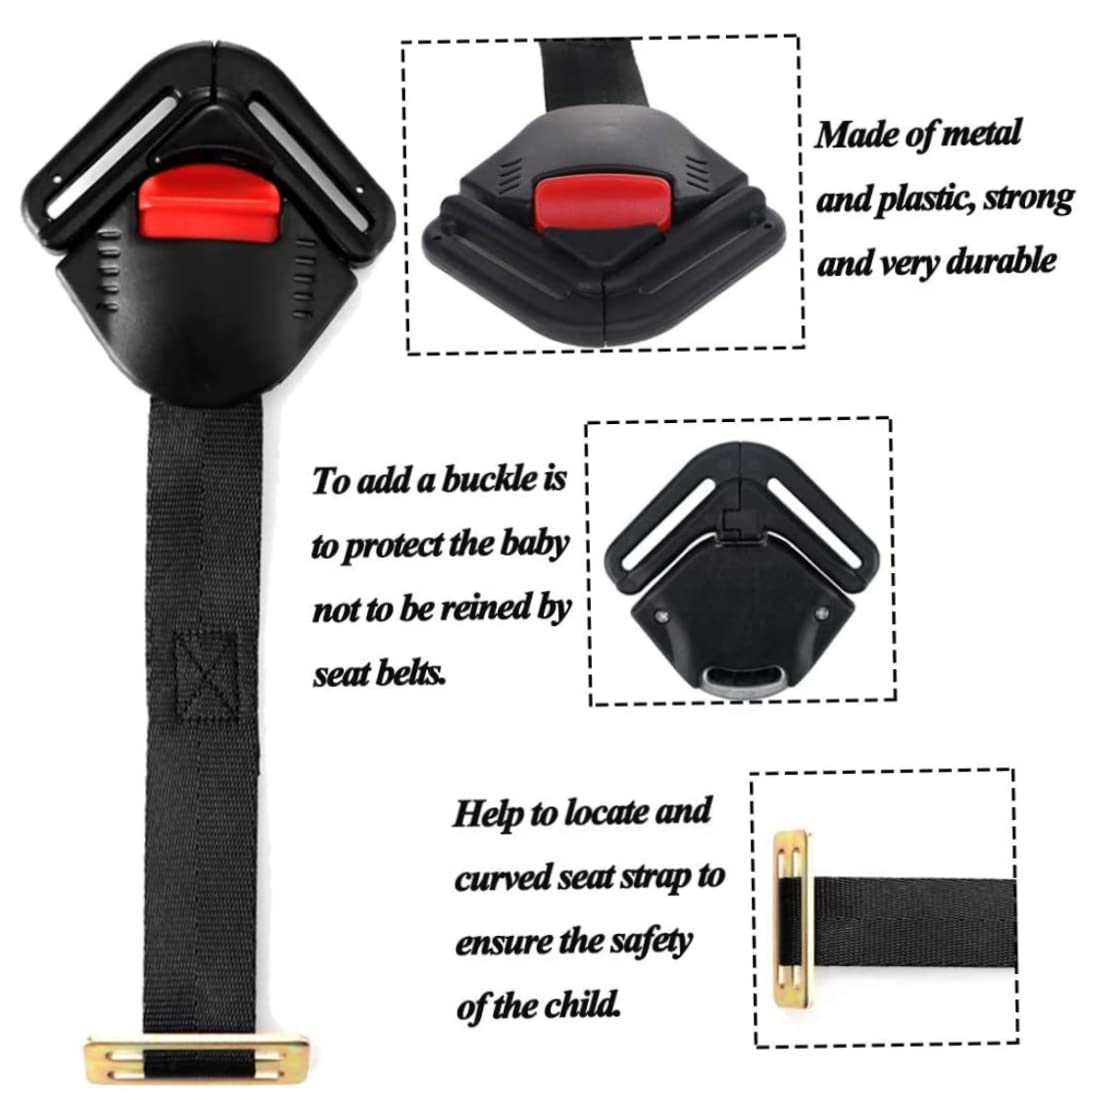 Child Car Seat Lock Baby Harness Chest Clip Adjustable Strap for Pushchair Child Seat Buckle Black